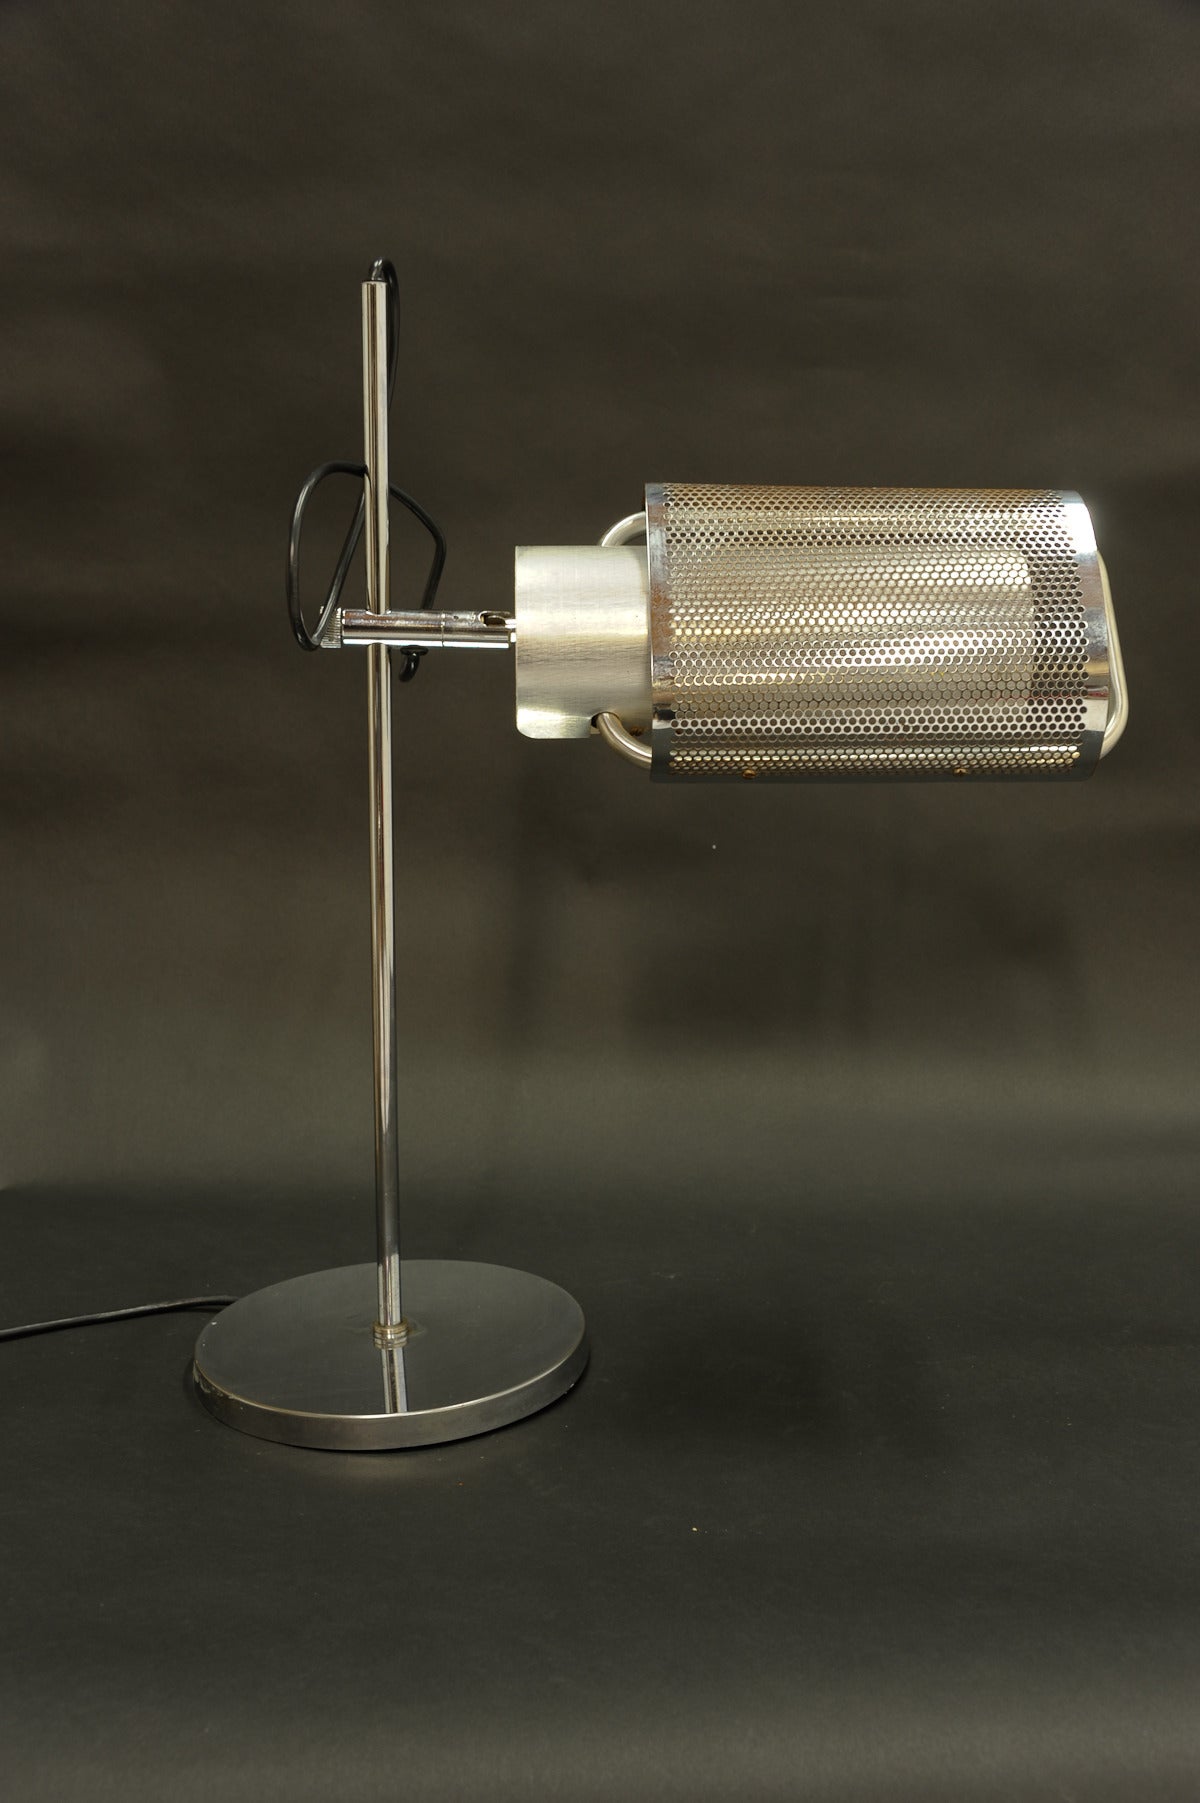 A wonderful example of a George Nelson desk lamp for Koch and Lowe. The head travels up and down the post and can rotate in all directions.